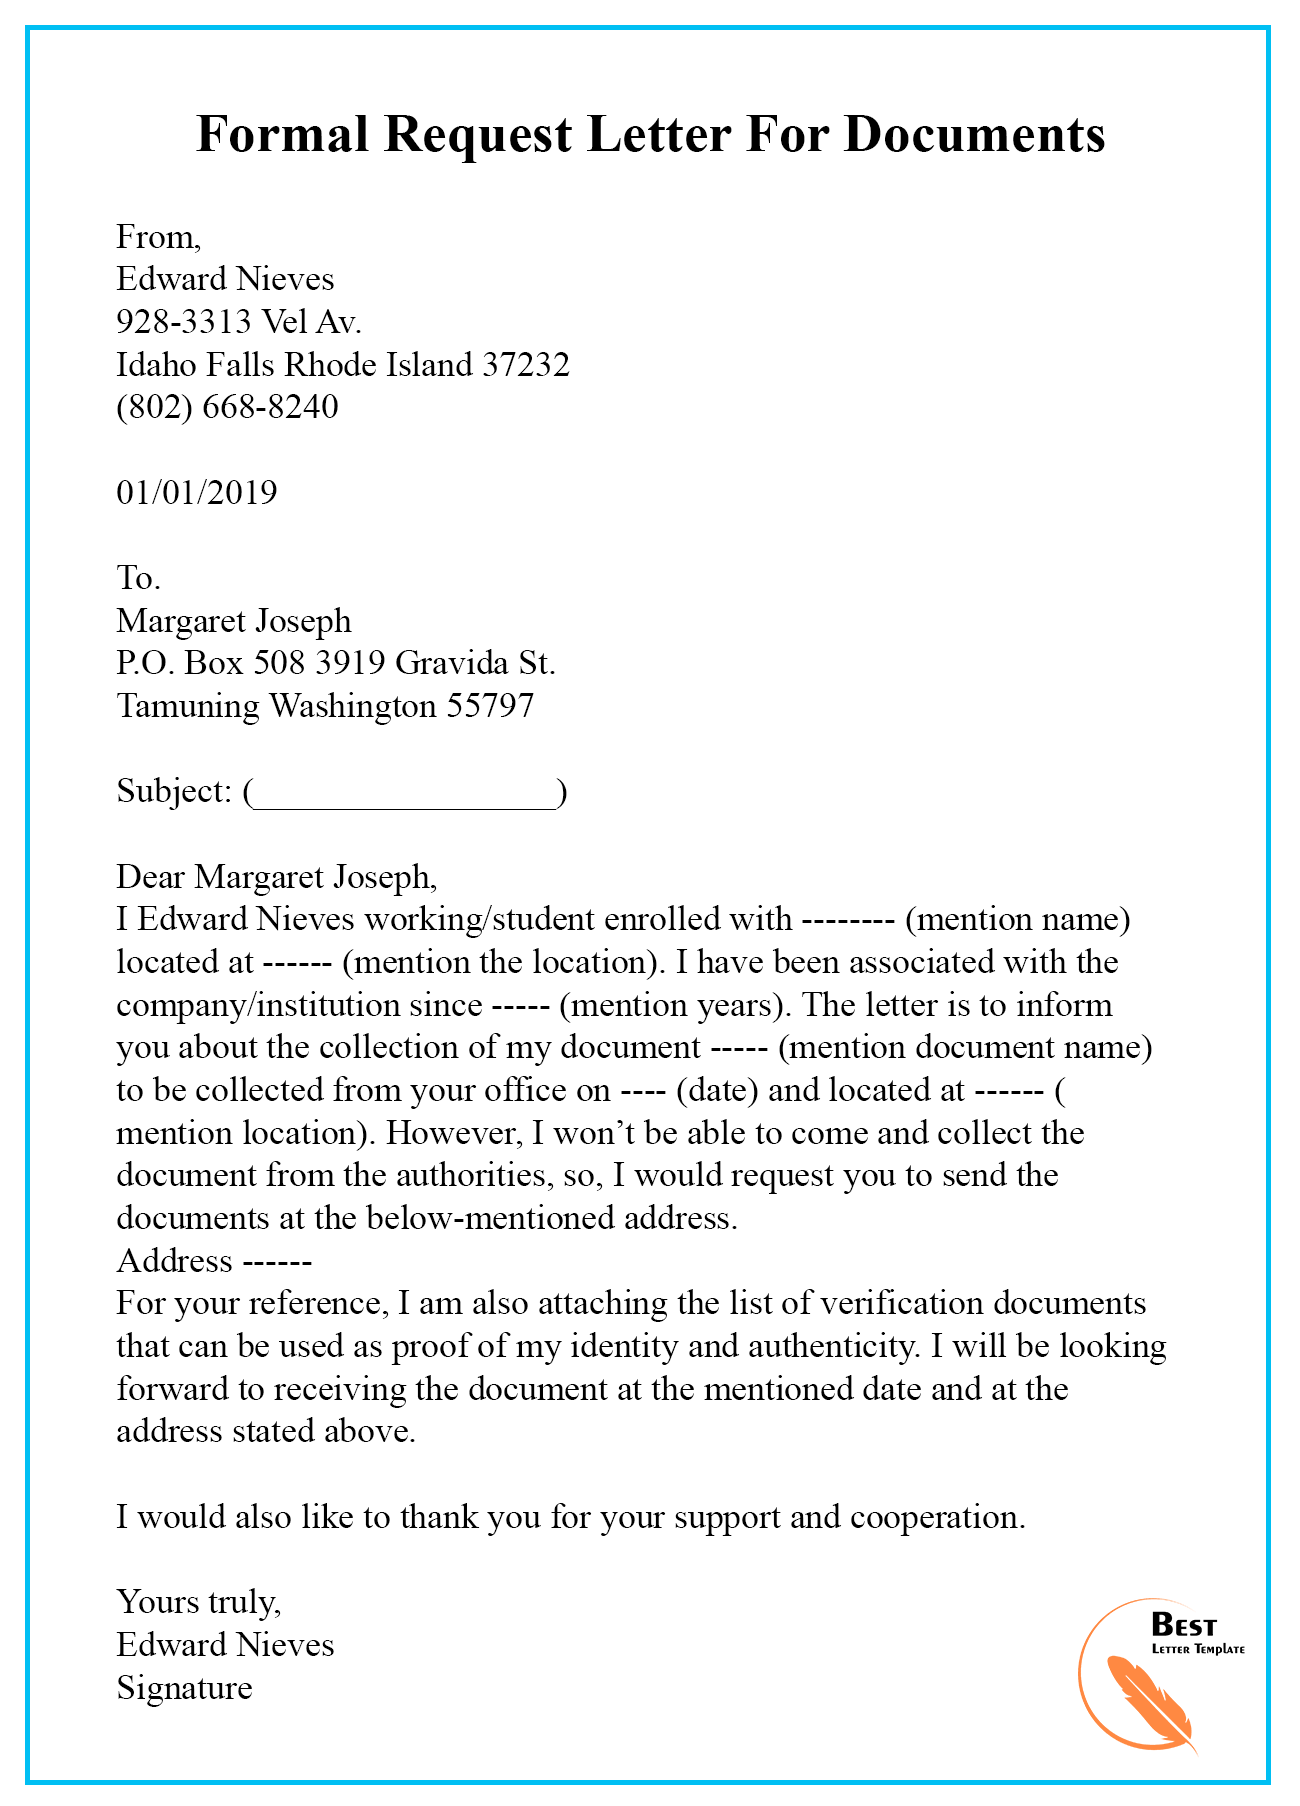 Sample Letter Of Request For Documents Gambaran